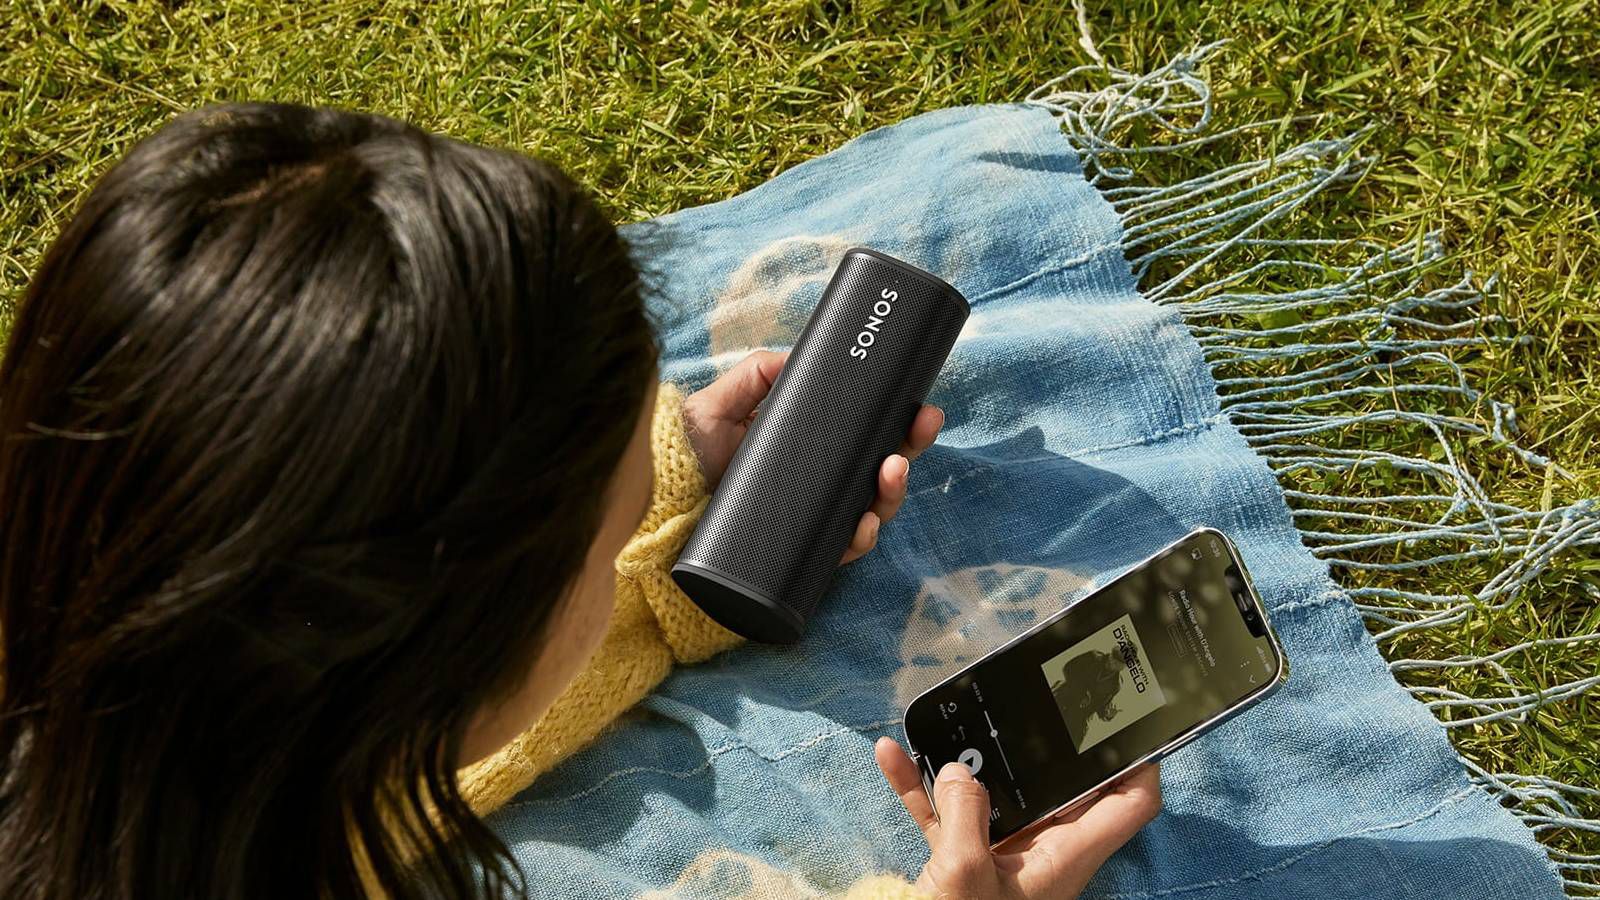 Sonos launches $ 169 Roam portable speaker with AirPlay 2, sound exchange and more